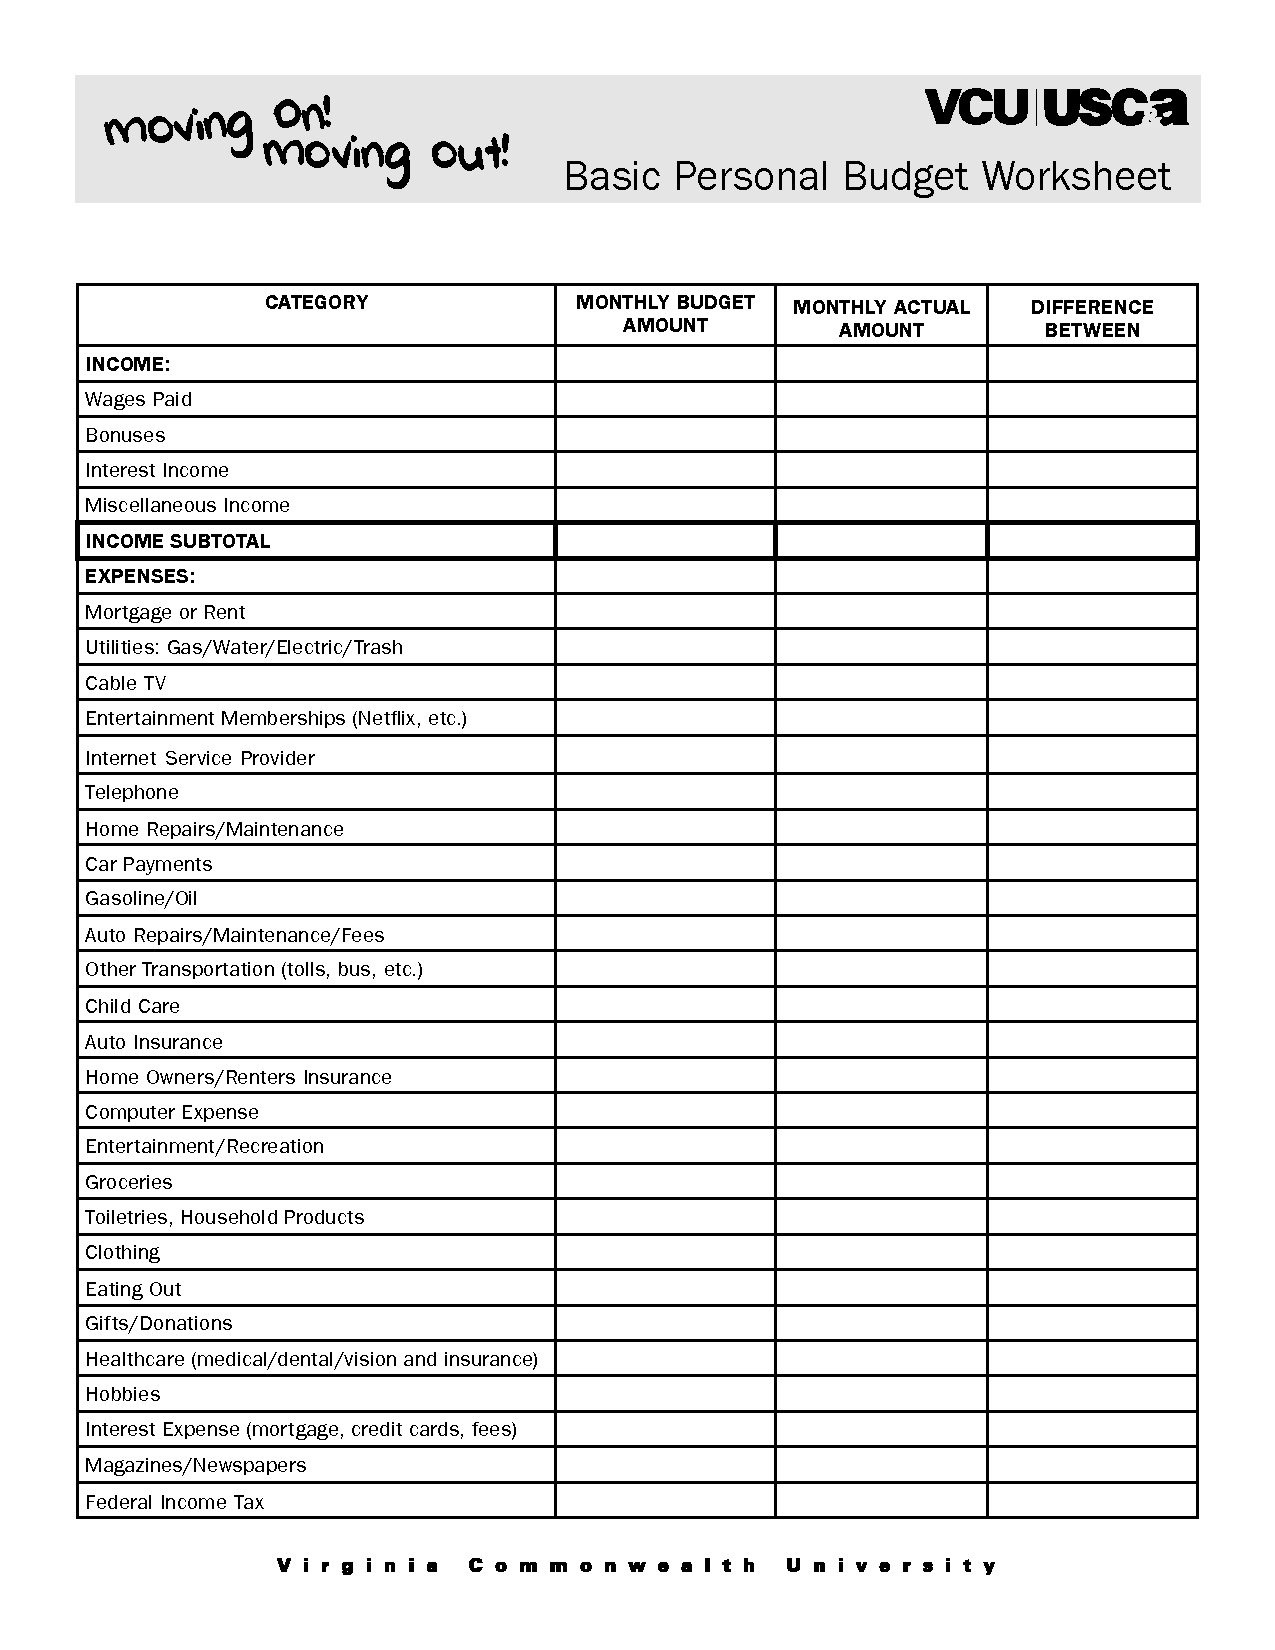 Personal Budget Worksheet Template Image